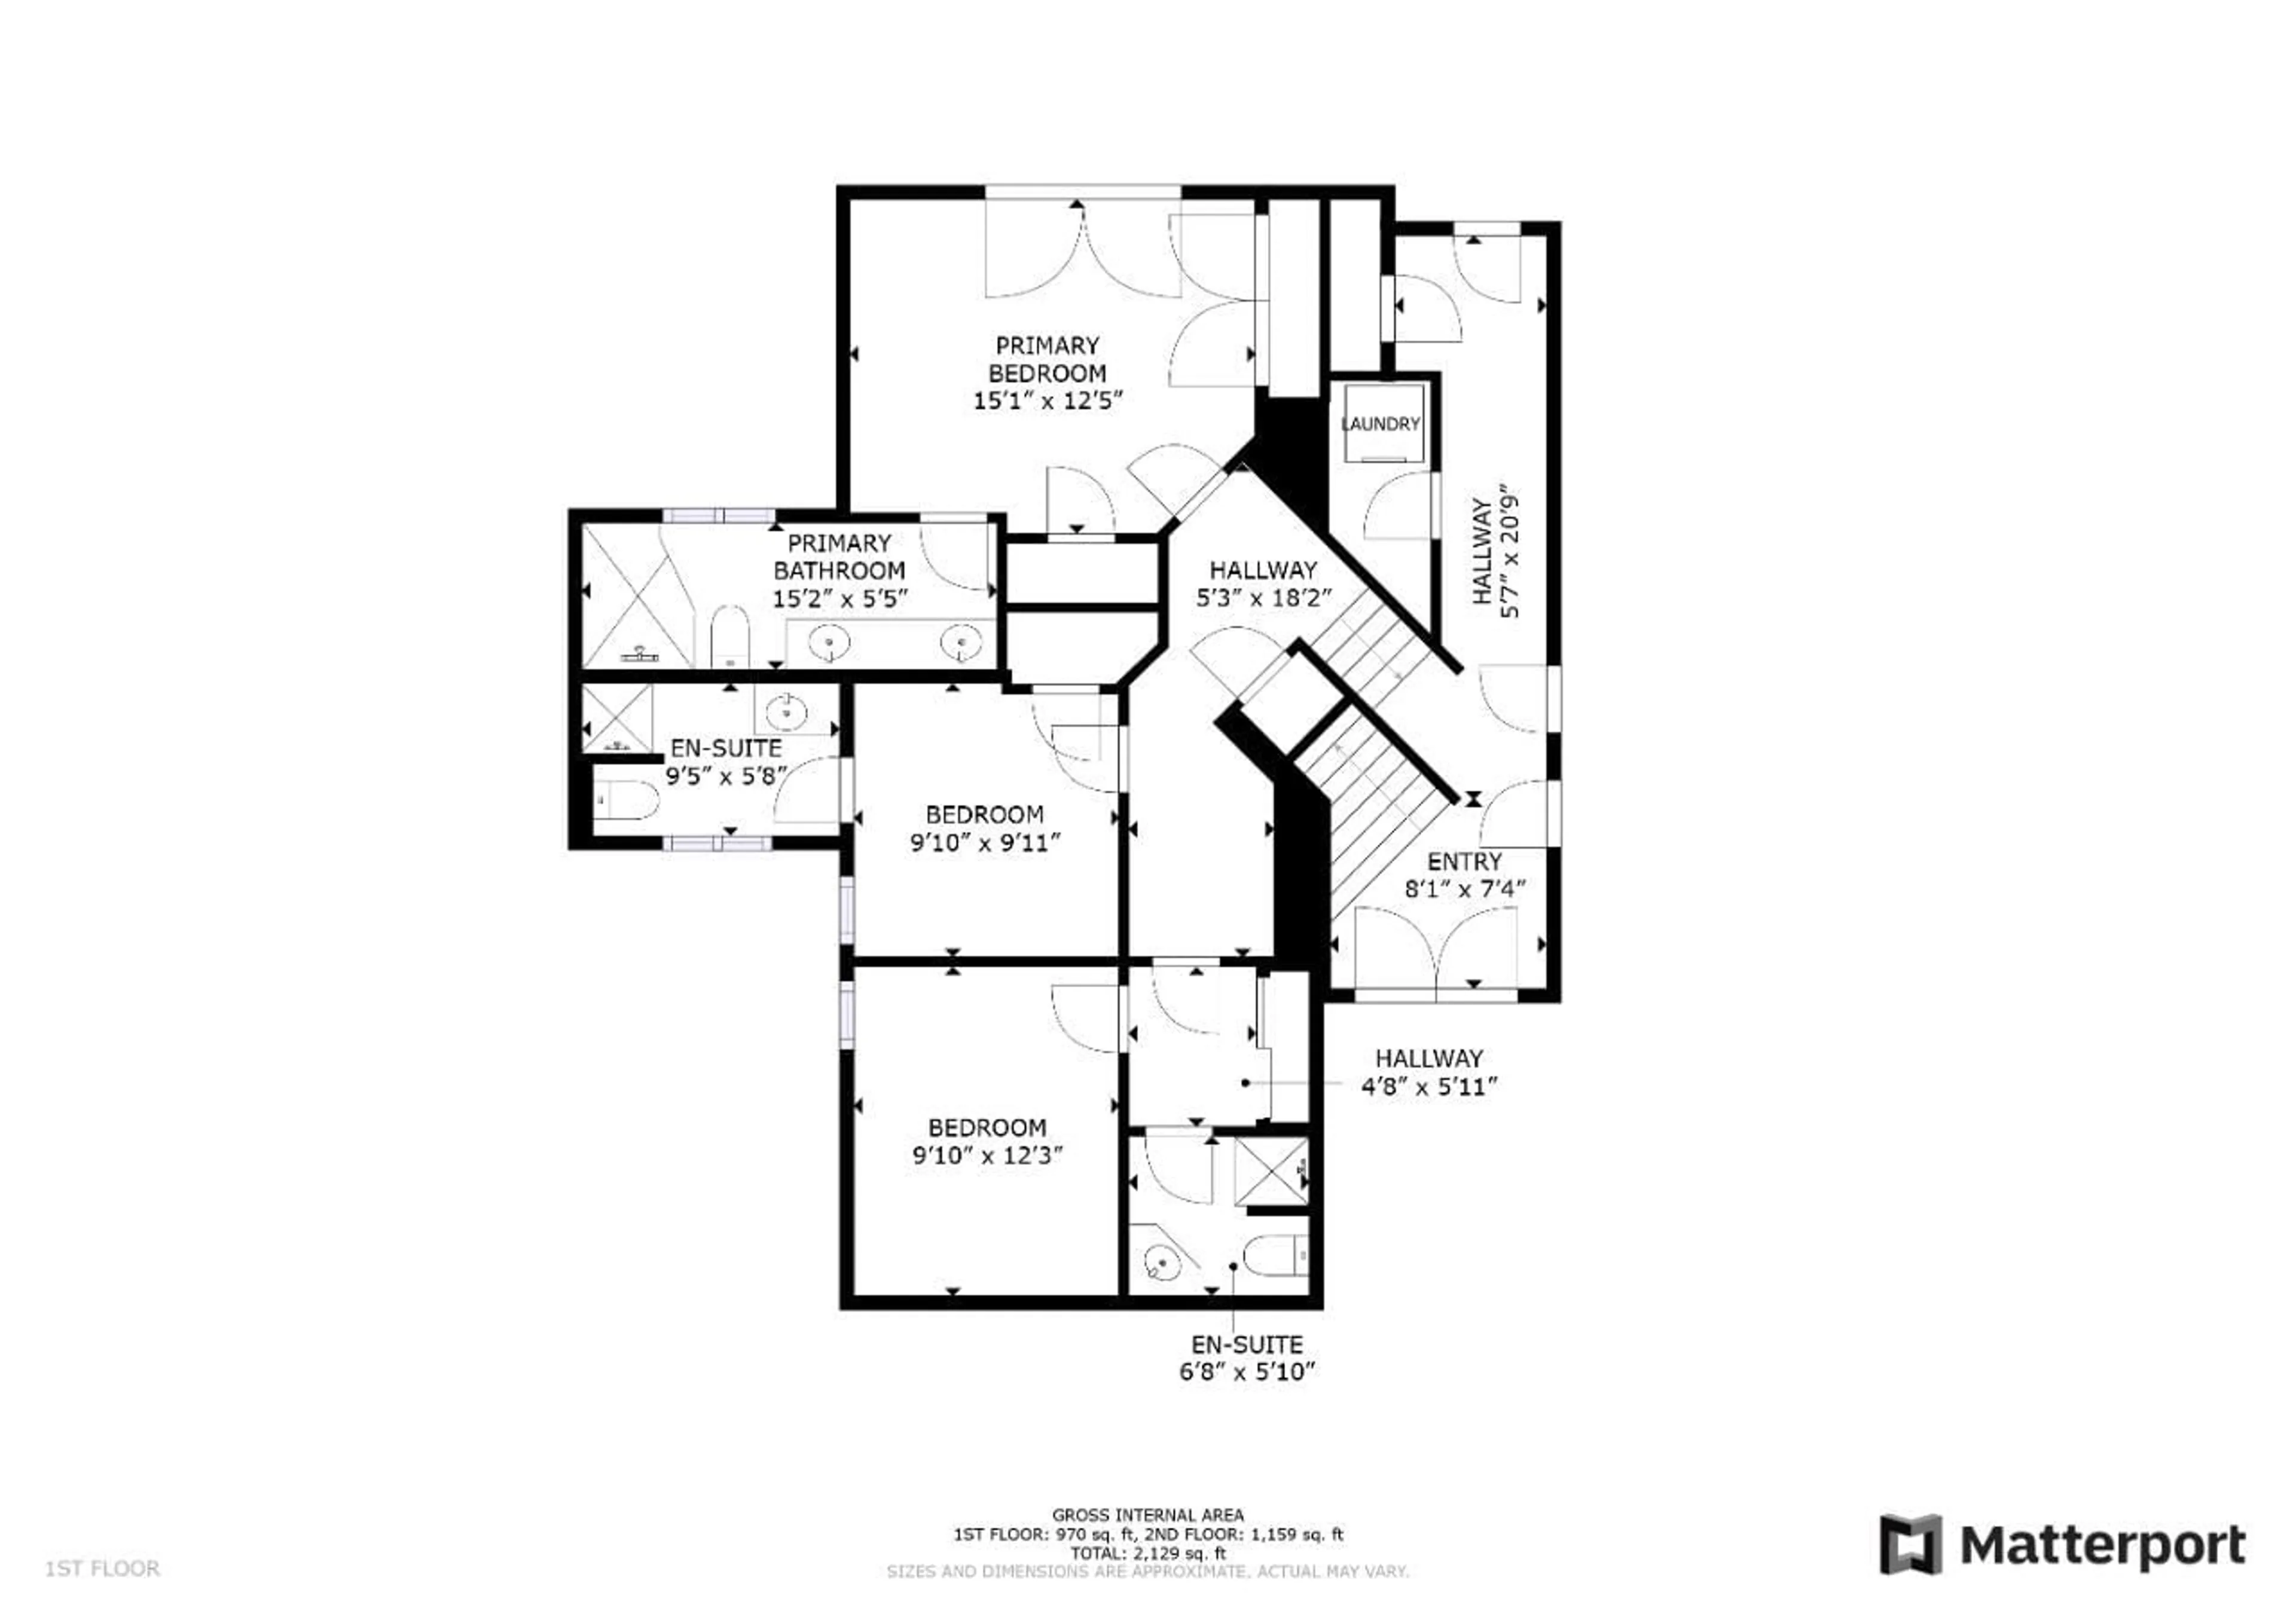 Floor plan for 13 - 640 UPPER LAKEVIEW ROAD, Invermere British Columbia V0A1K3